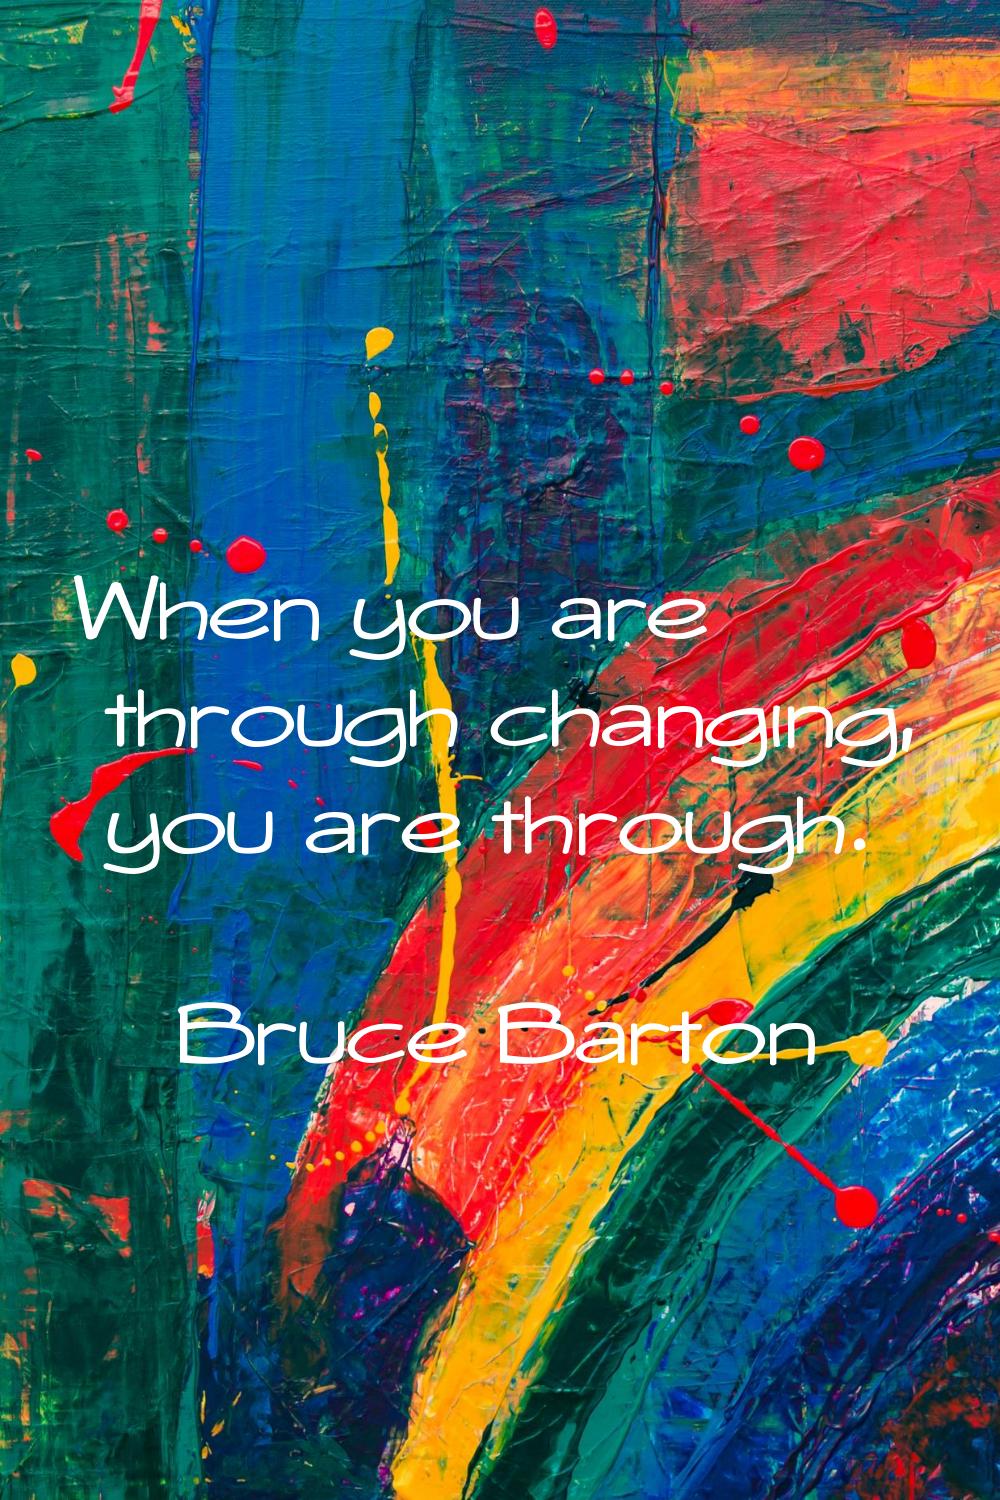 When you are through changing, you are through.